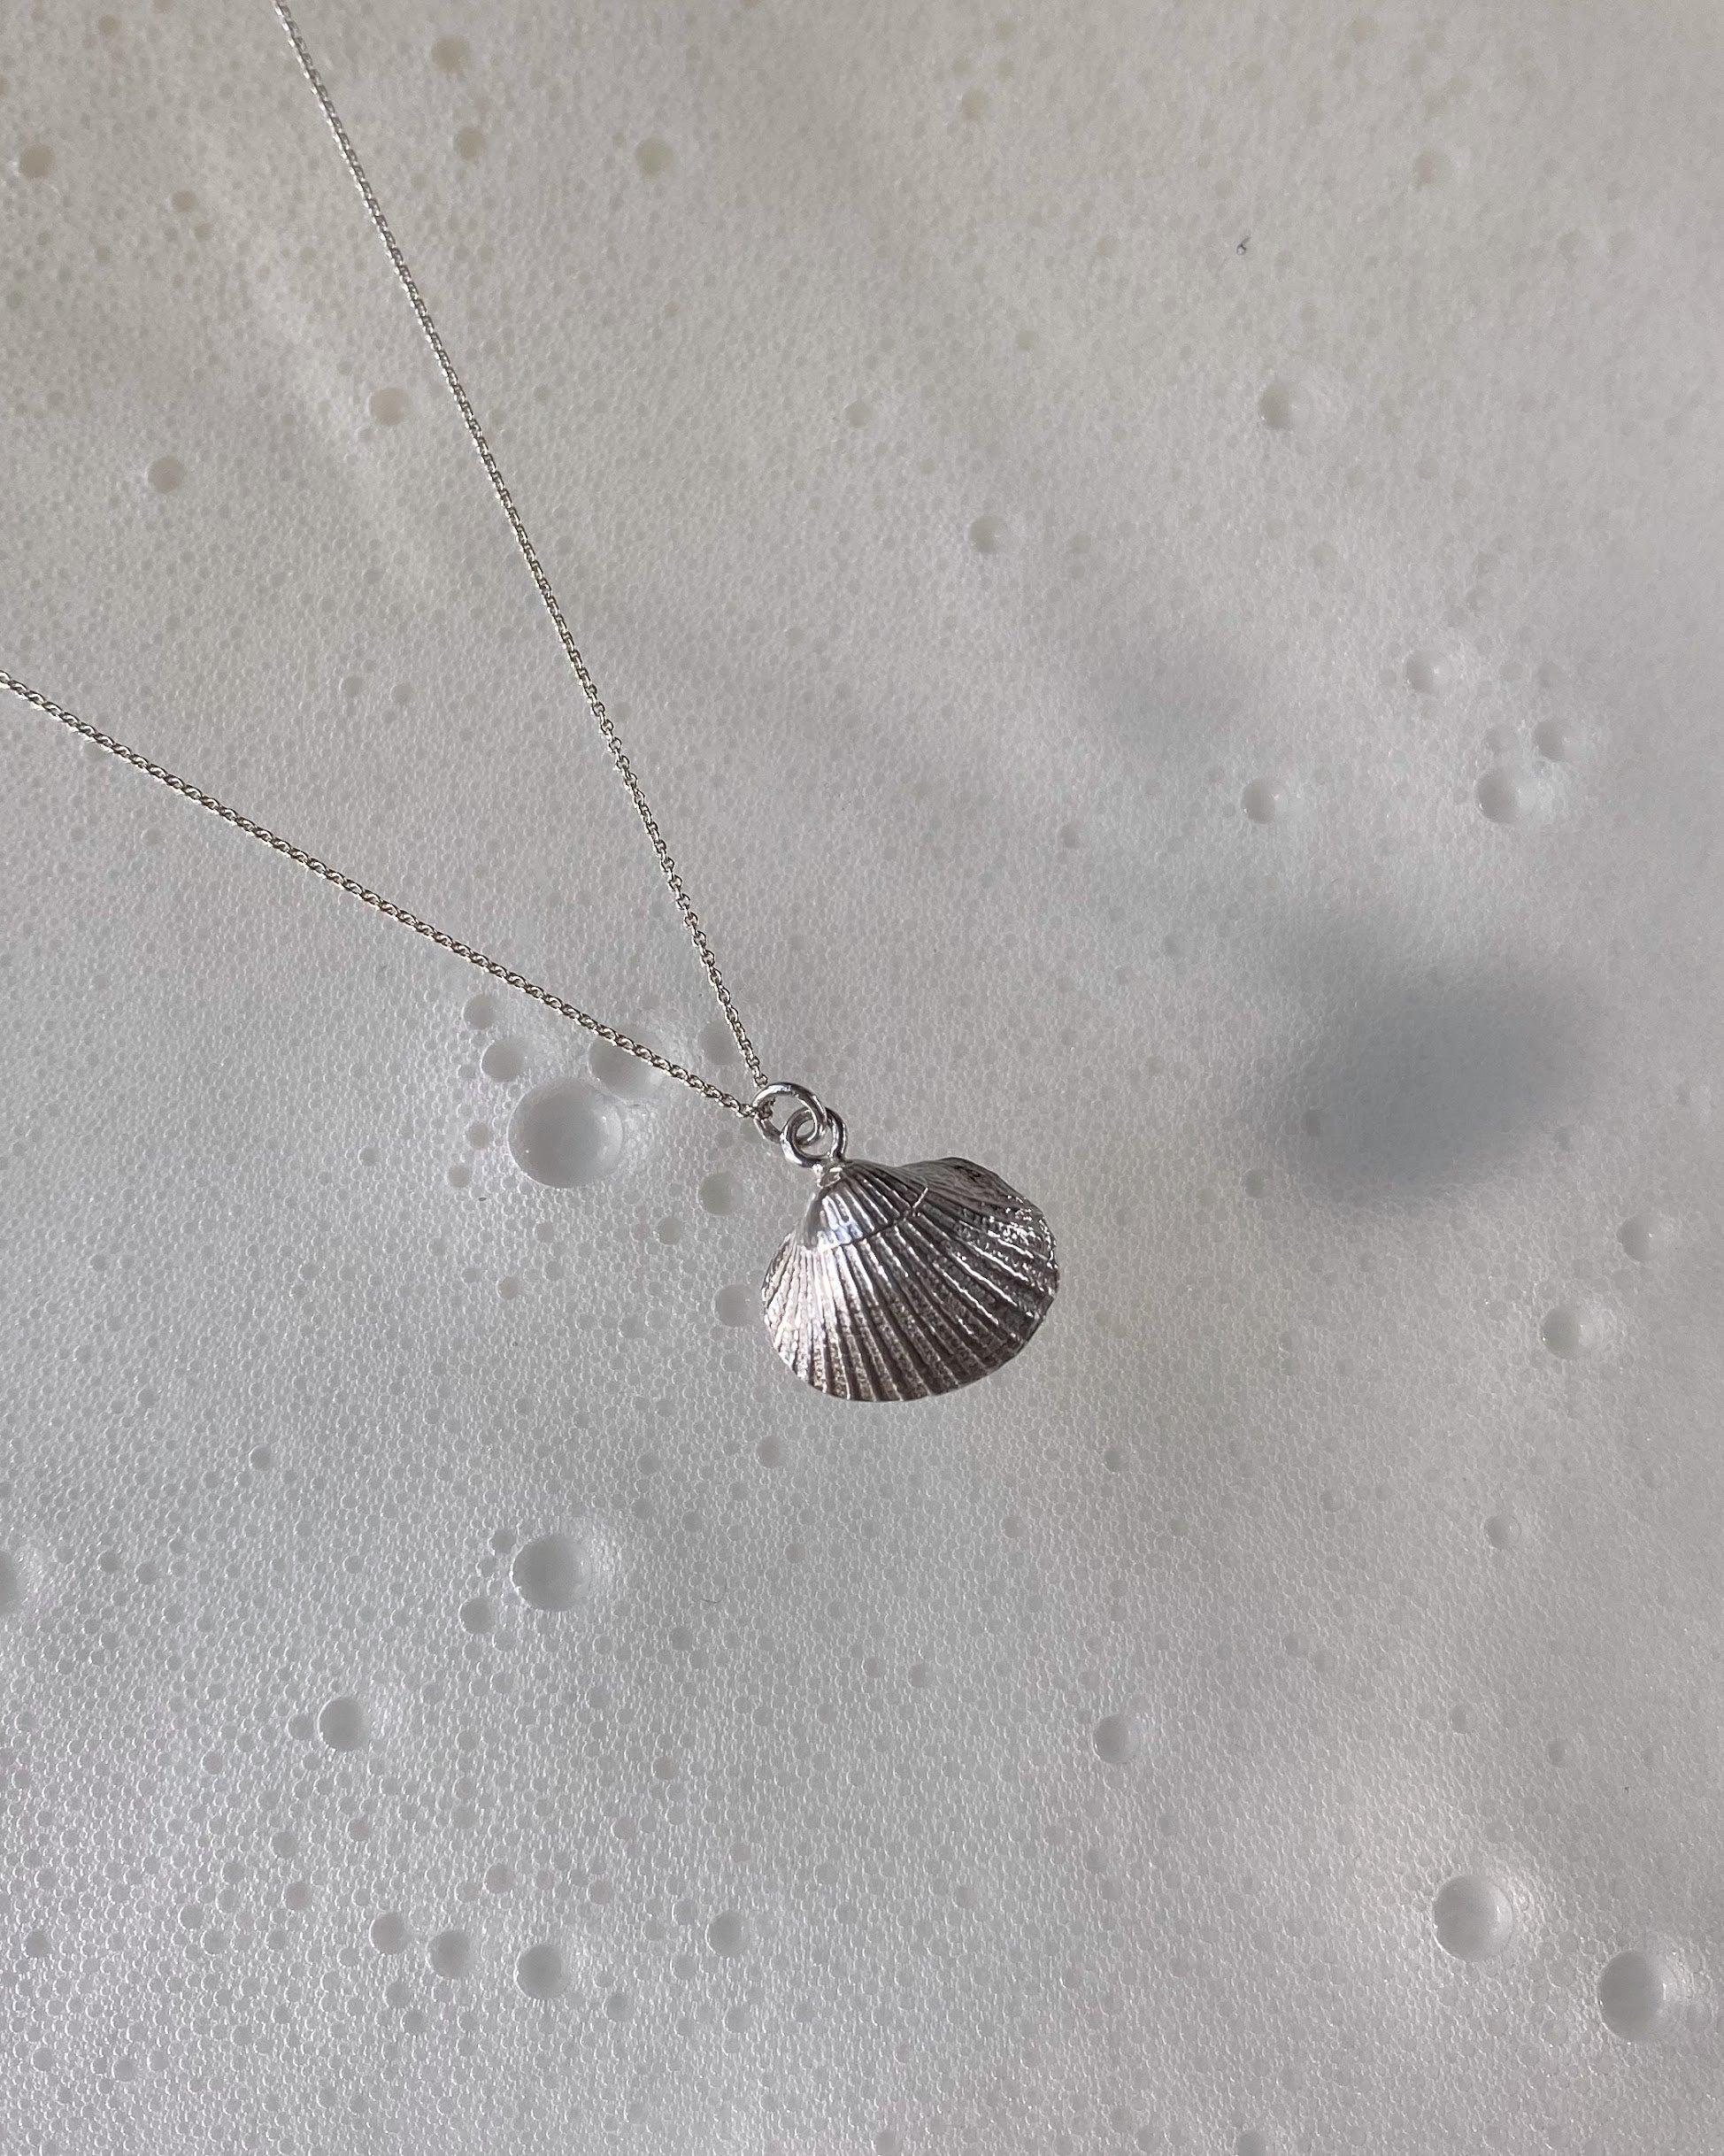 Seashell Necklace Silver